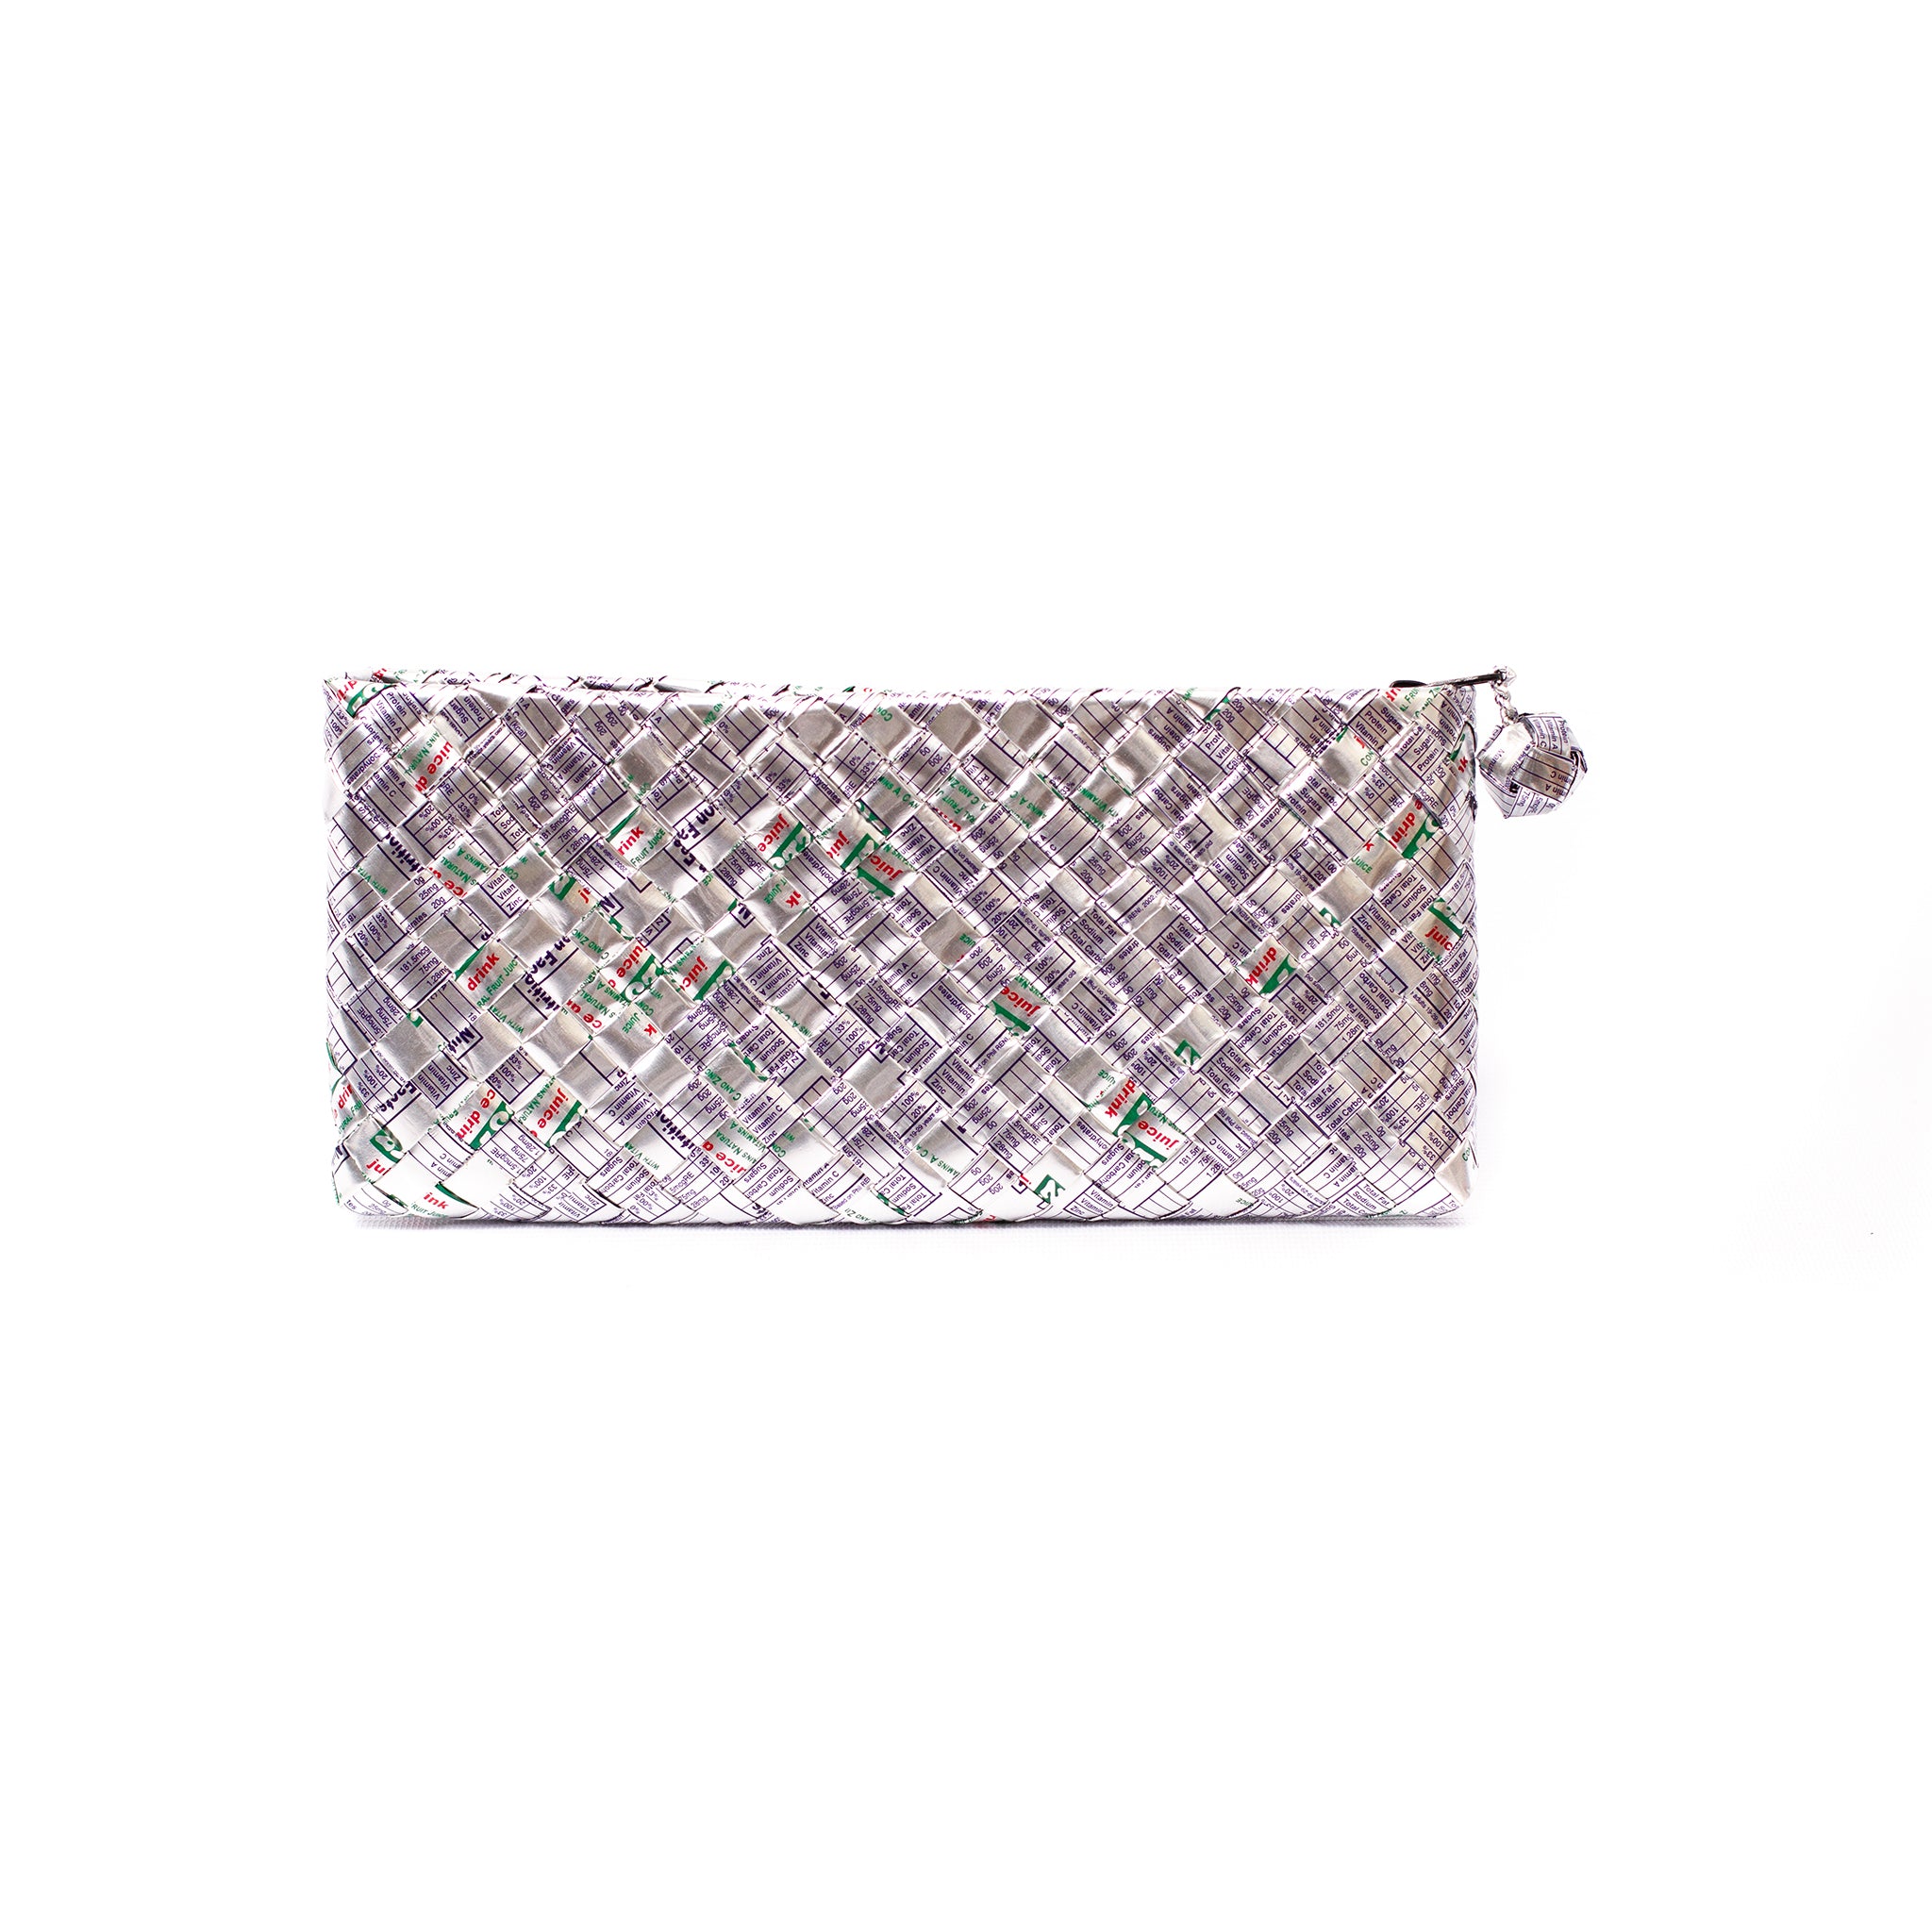 Sparkly Silver Glitter Rhinestone Metal Clutch Bags 2018#colorful   #photooftheday #cute  #picoftheday… | Glitter clutch bag, Crystal  evening bag, Prom bag